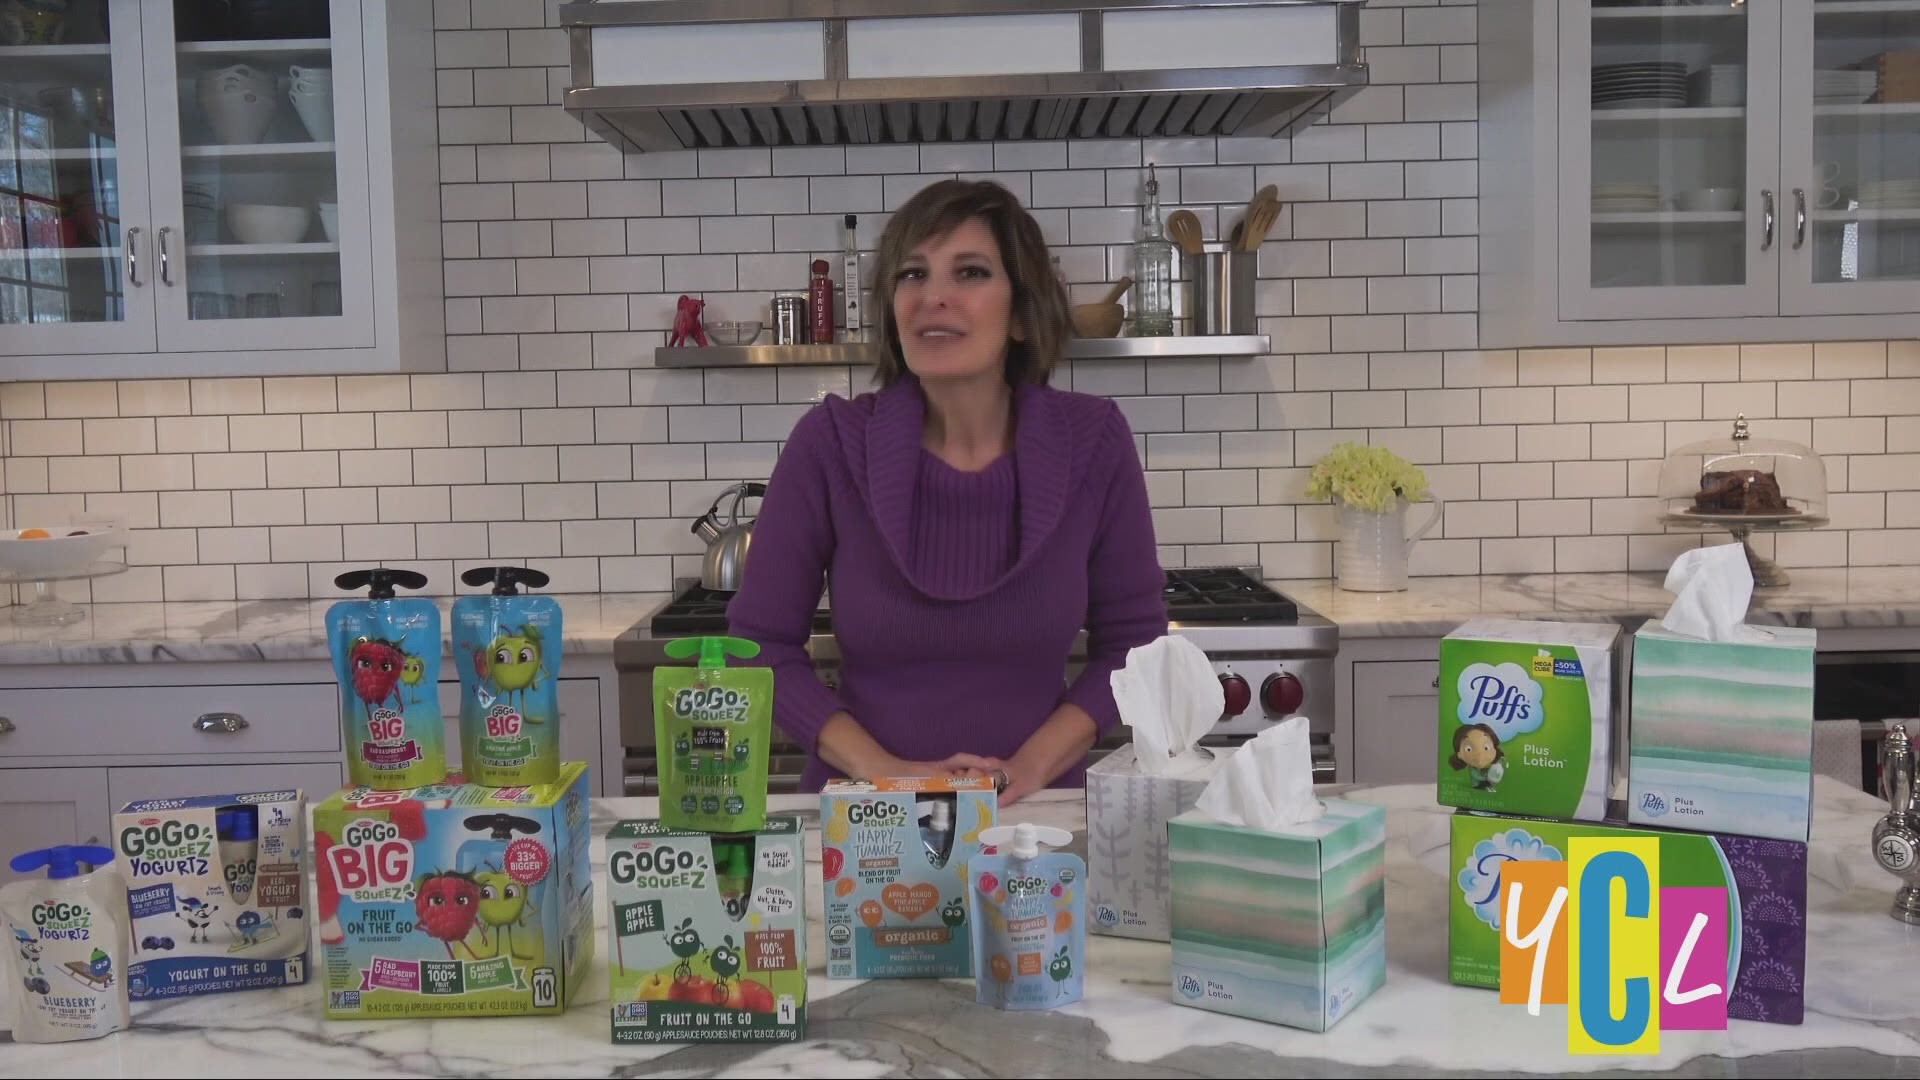 Check out the key household must-have items for the little ones in your life. This segment was paid for by GoGo squeeZ and Puffs.